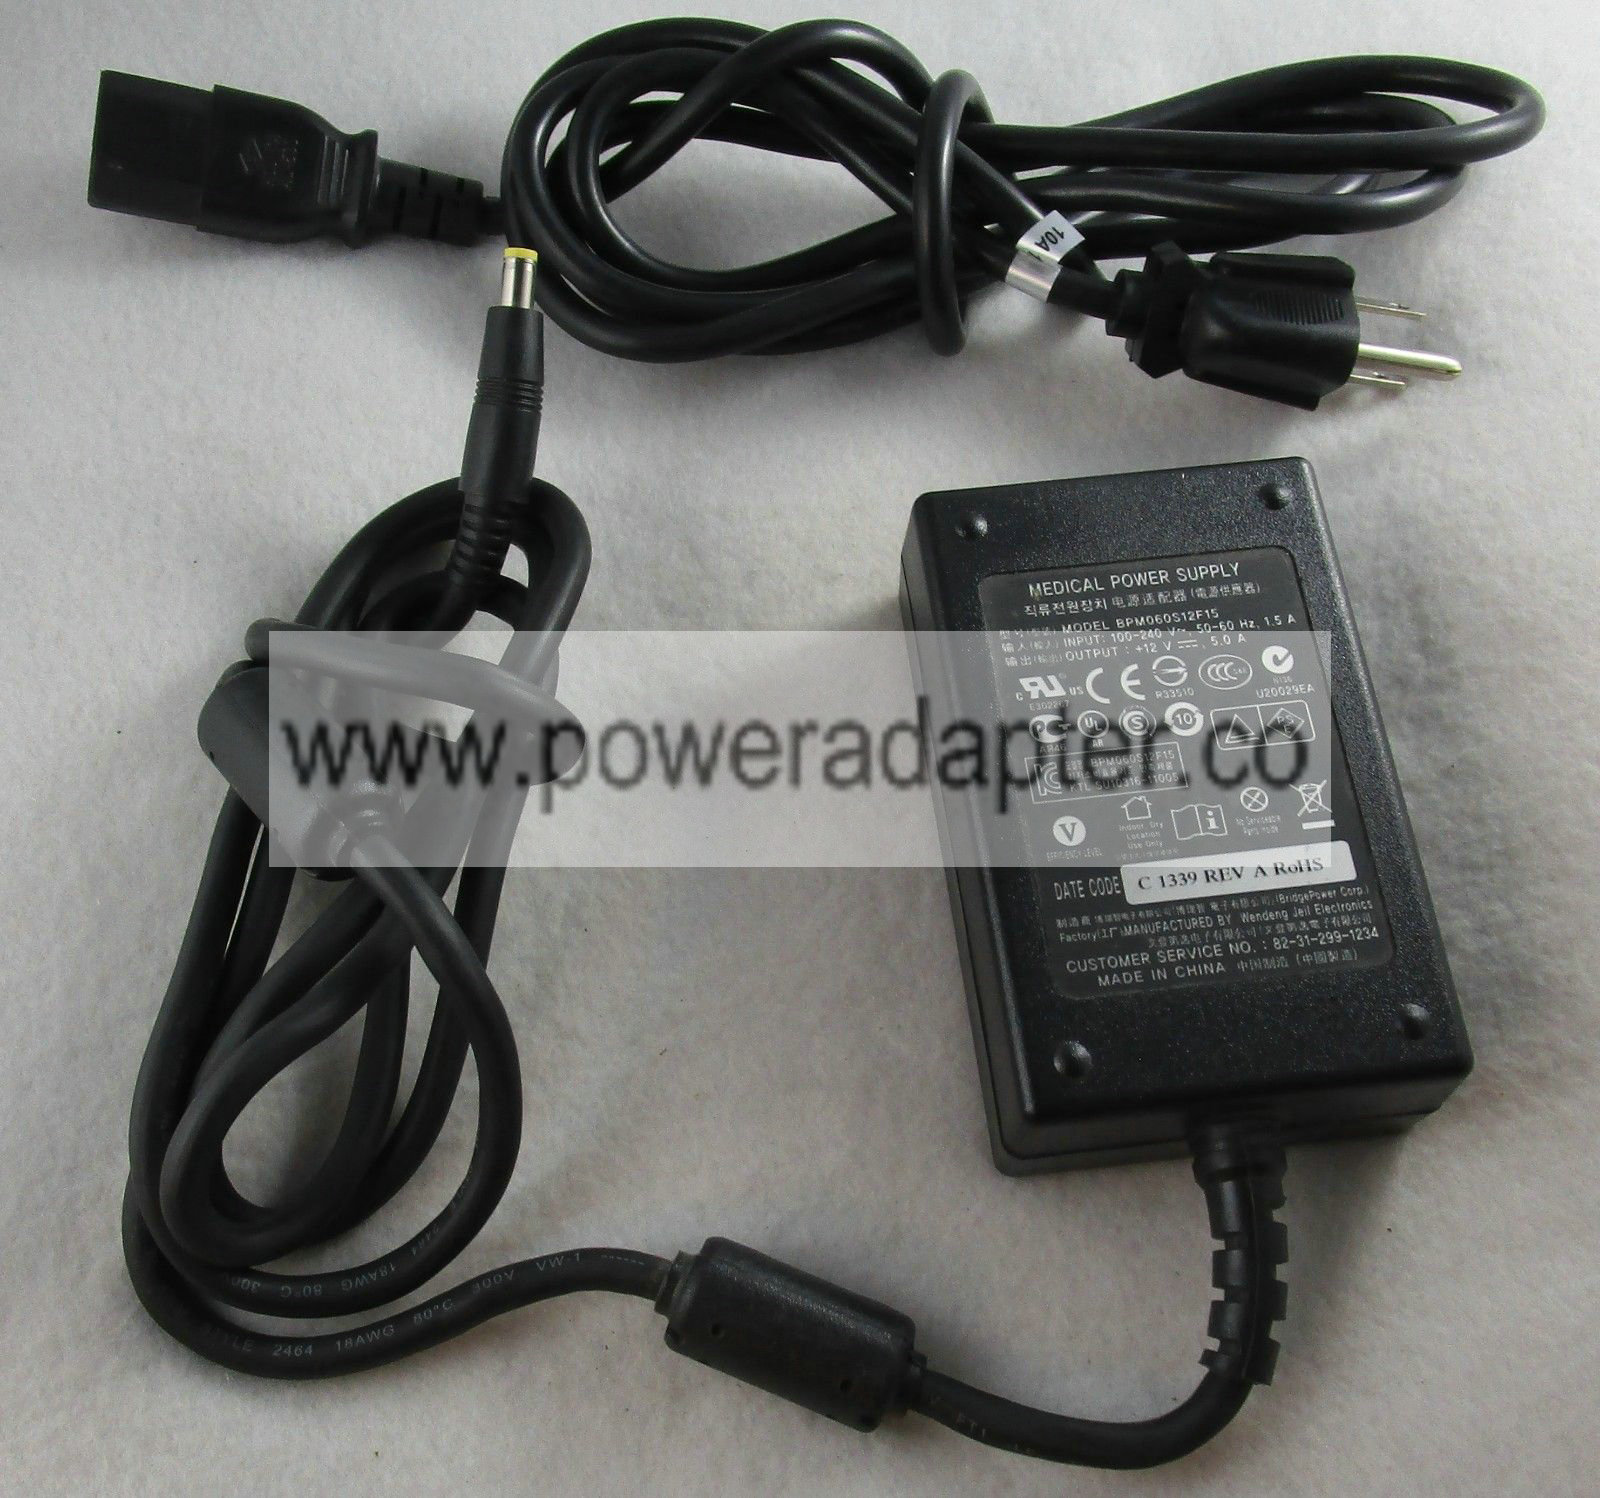 Wendng Jeil Medical Power Supply 12V 5A Barco Display AC Adapter BPM060S12F15 Bundled Items: Power Cable Non-Domesti